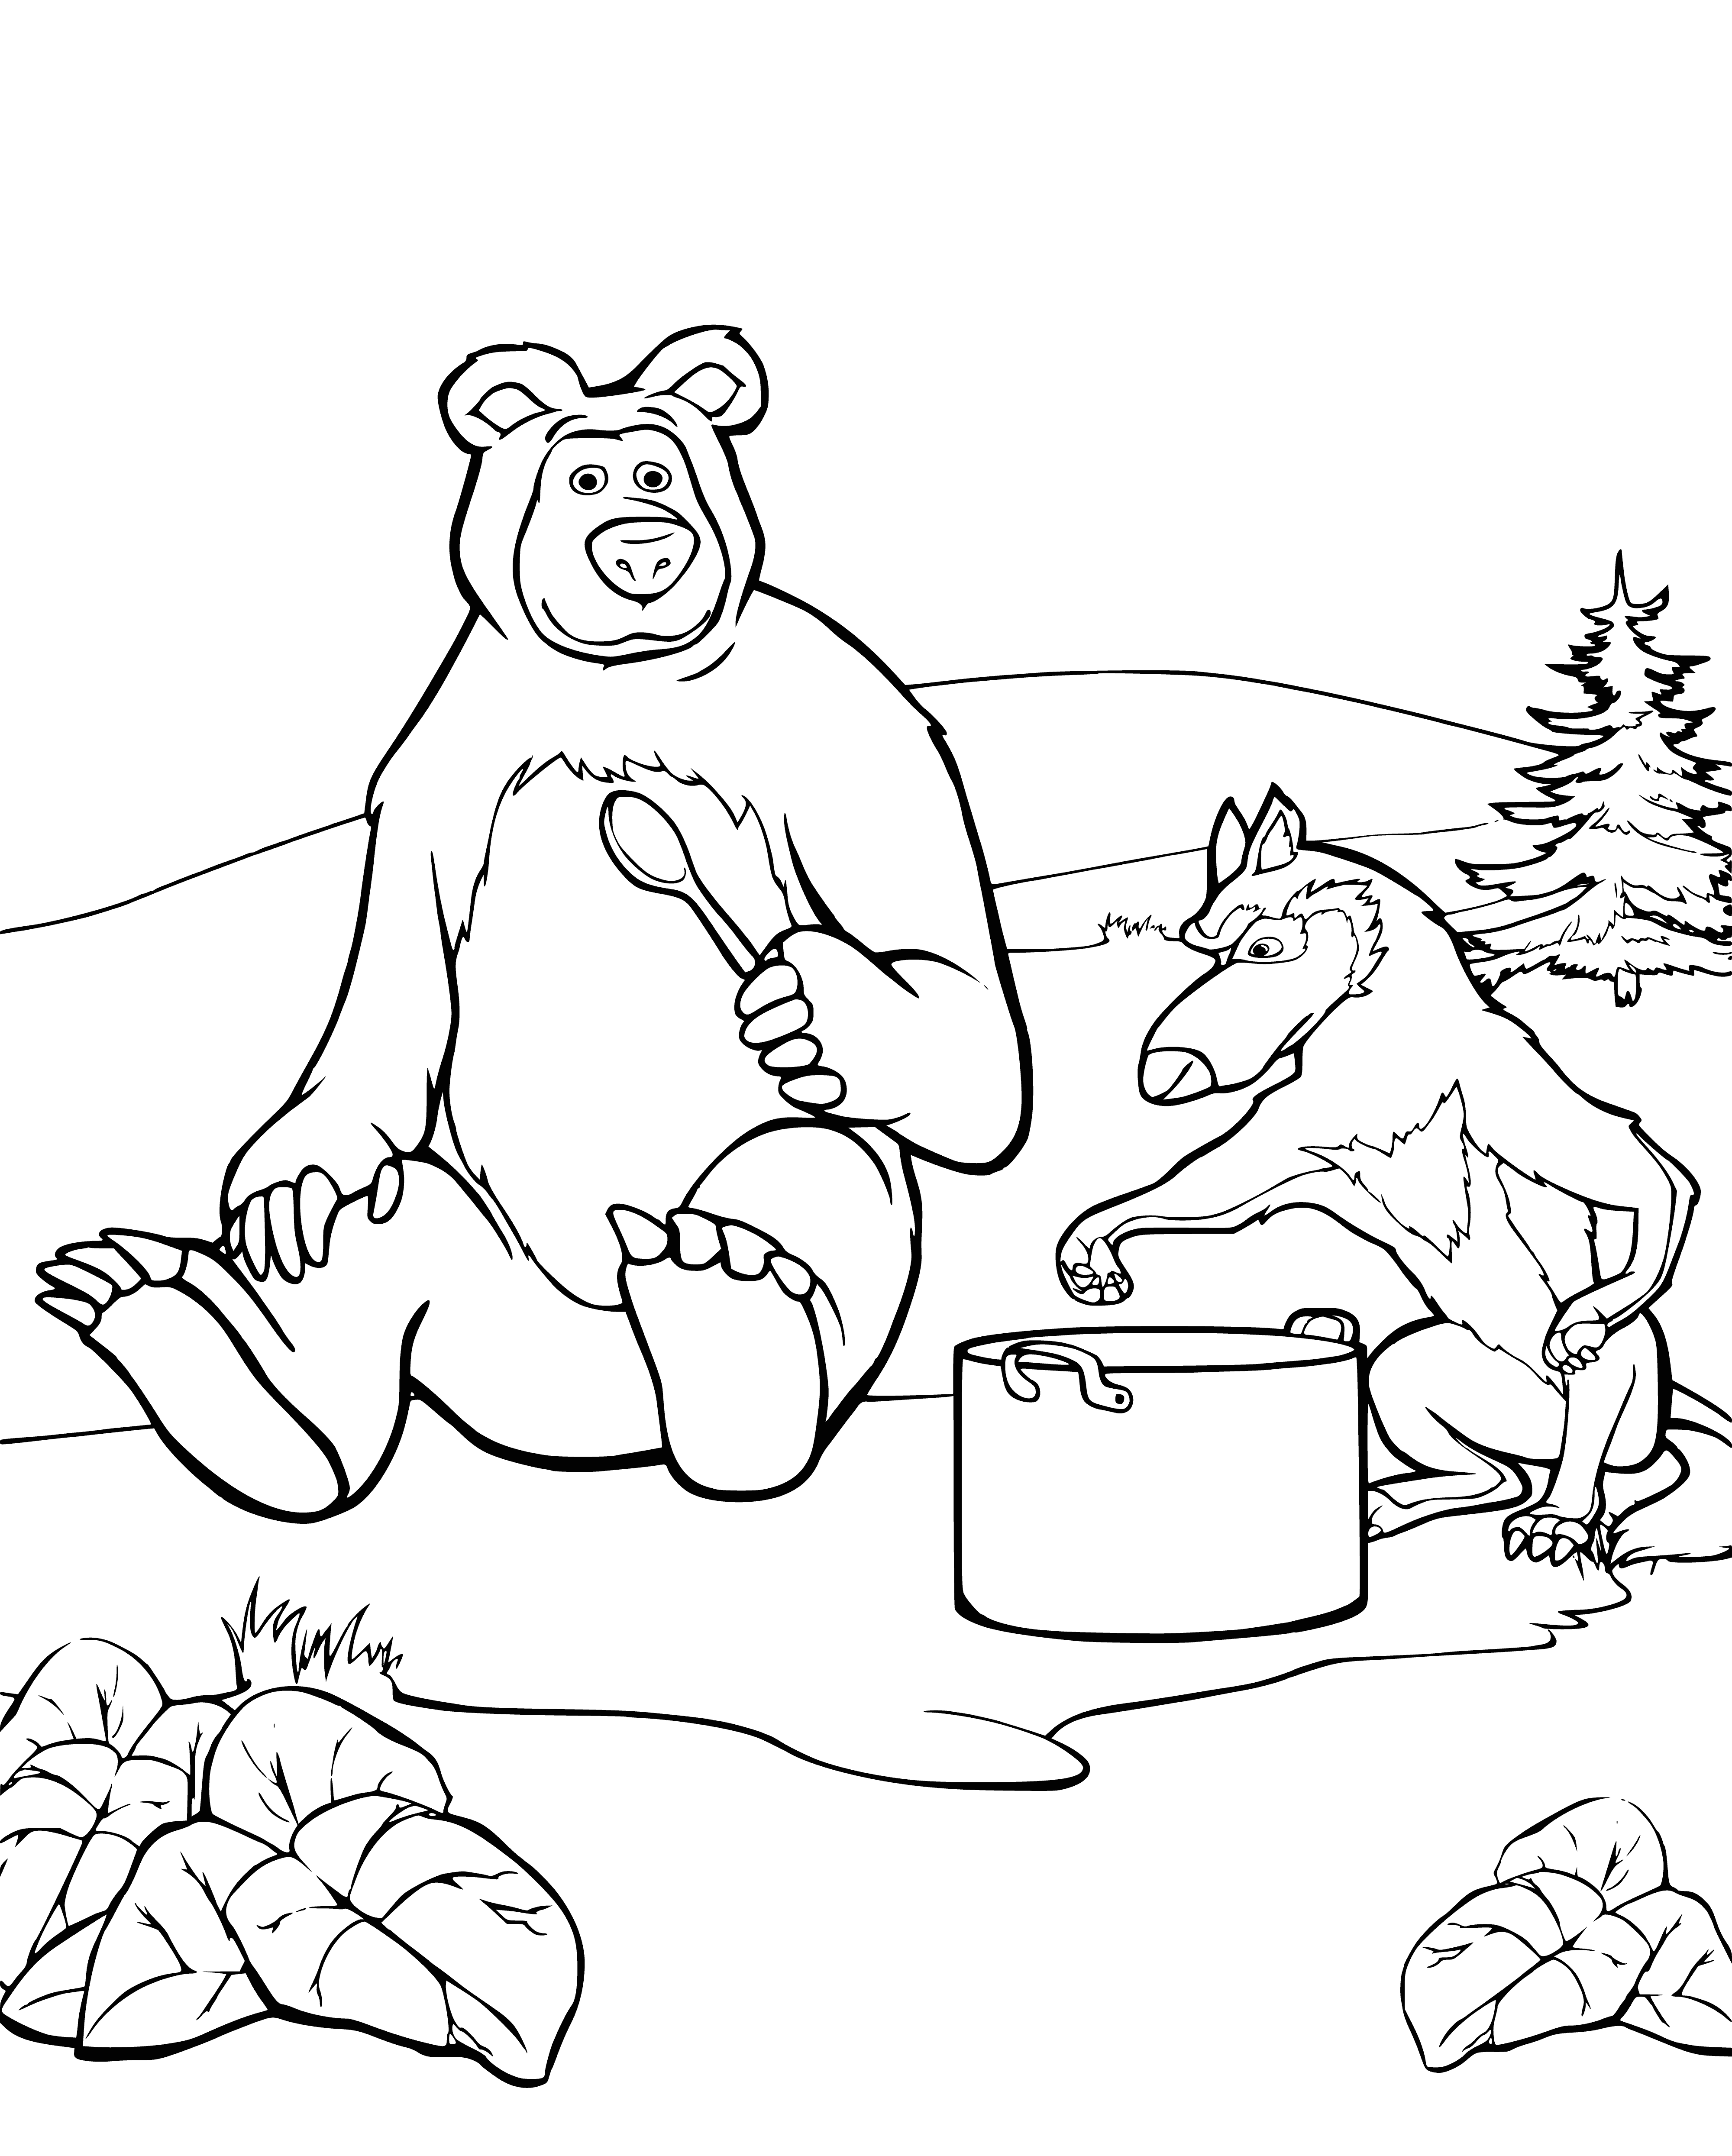 coloring page: Bear & Wolf sit side-by-side, Wolf eats porridge from a bowl on the table in this coloring page.